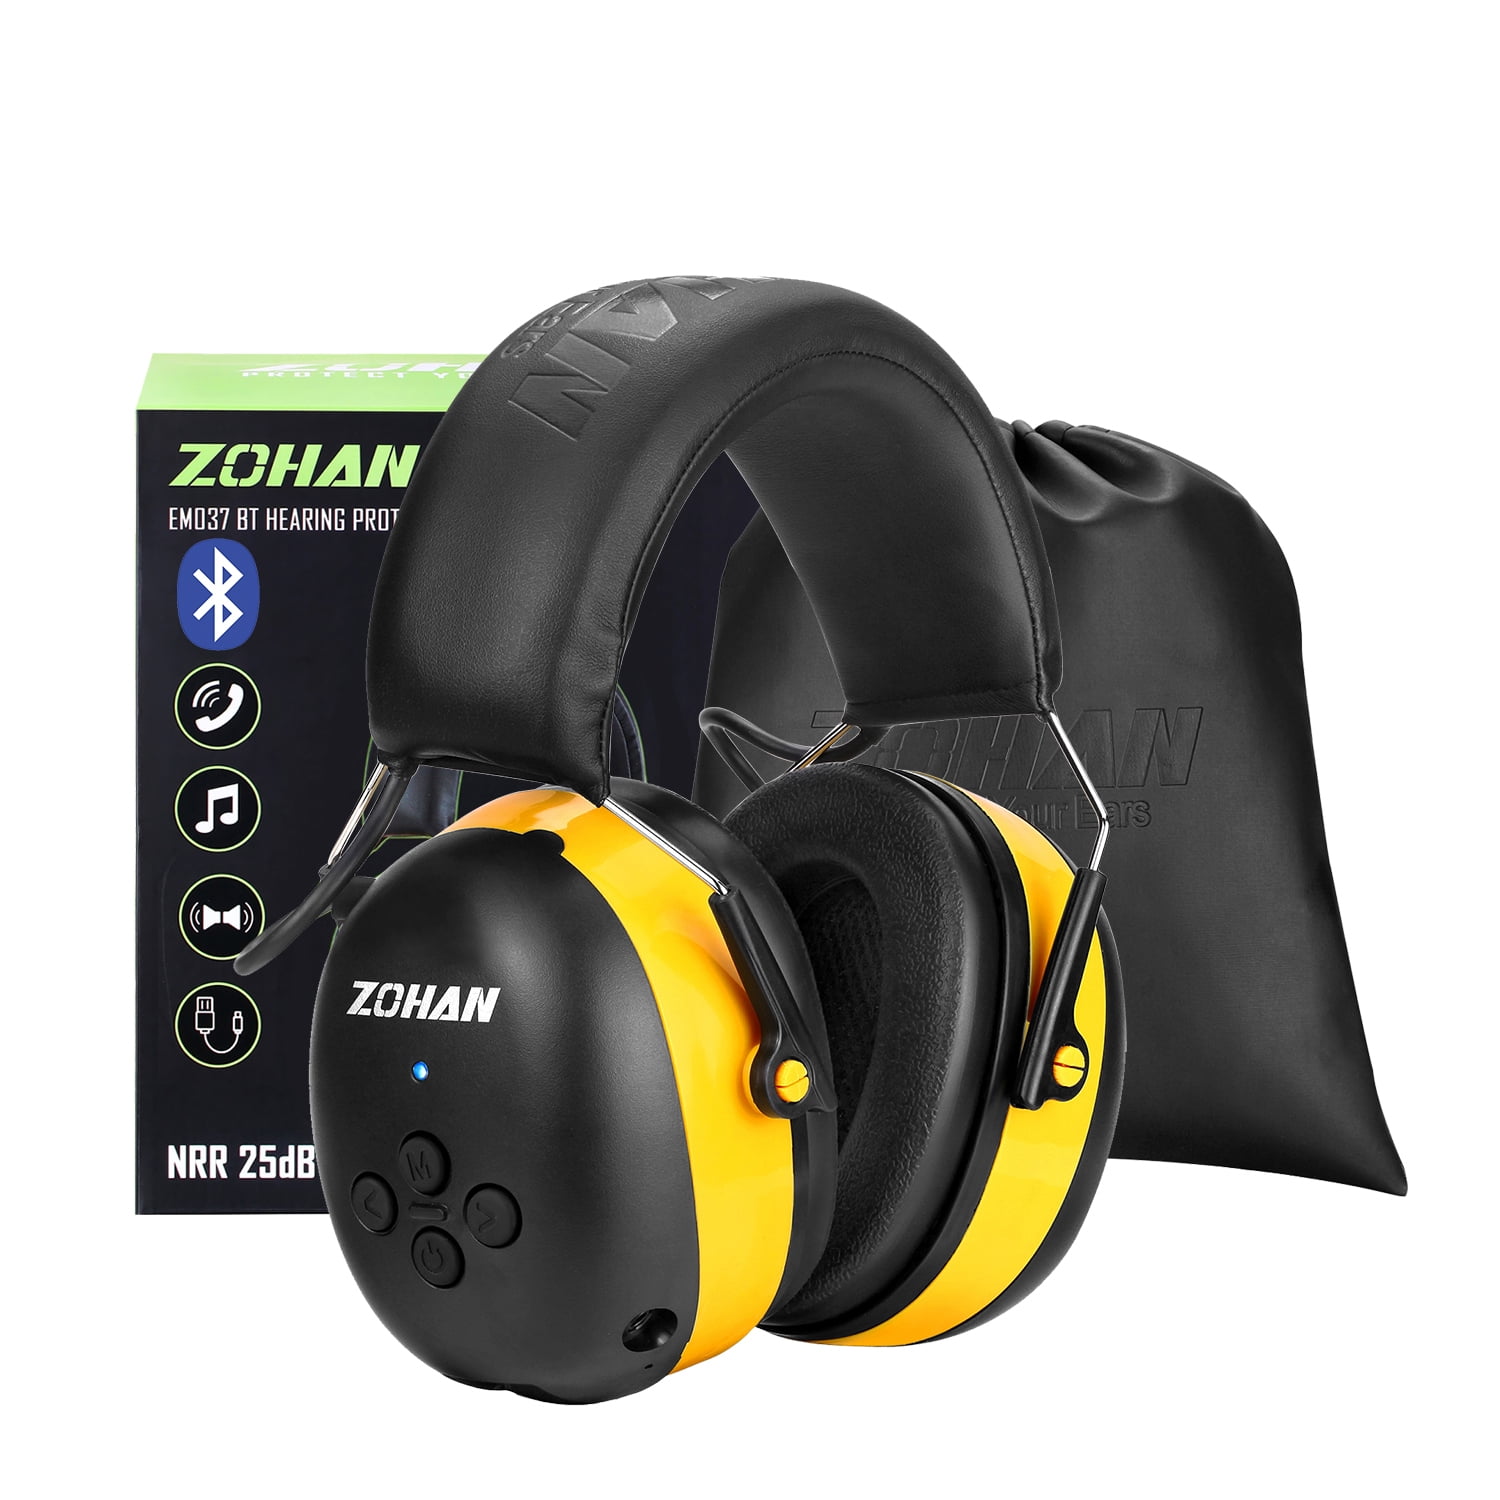 ZOHAN EM037 Hearing Protection with Bluetooth, NRR 25dB Noise Reduction Ear  Protection，Headphones for Mowing Construction